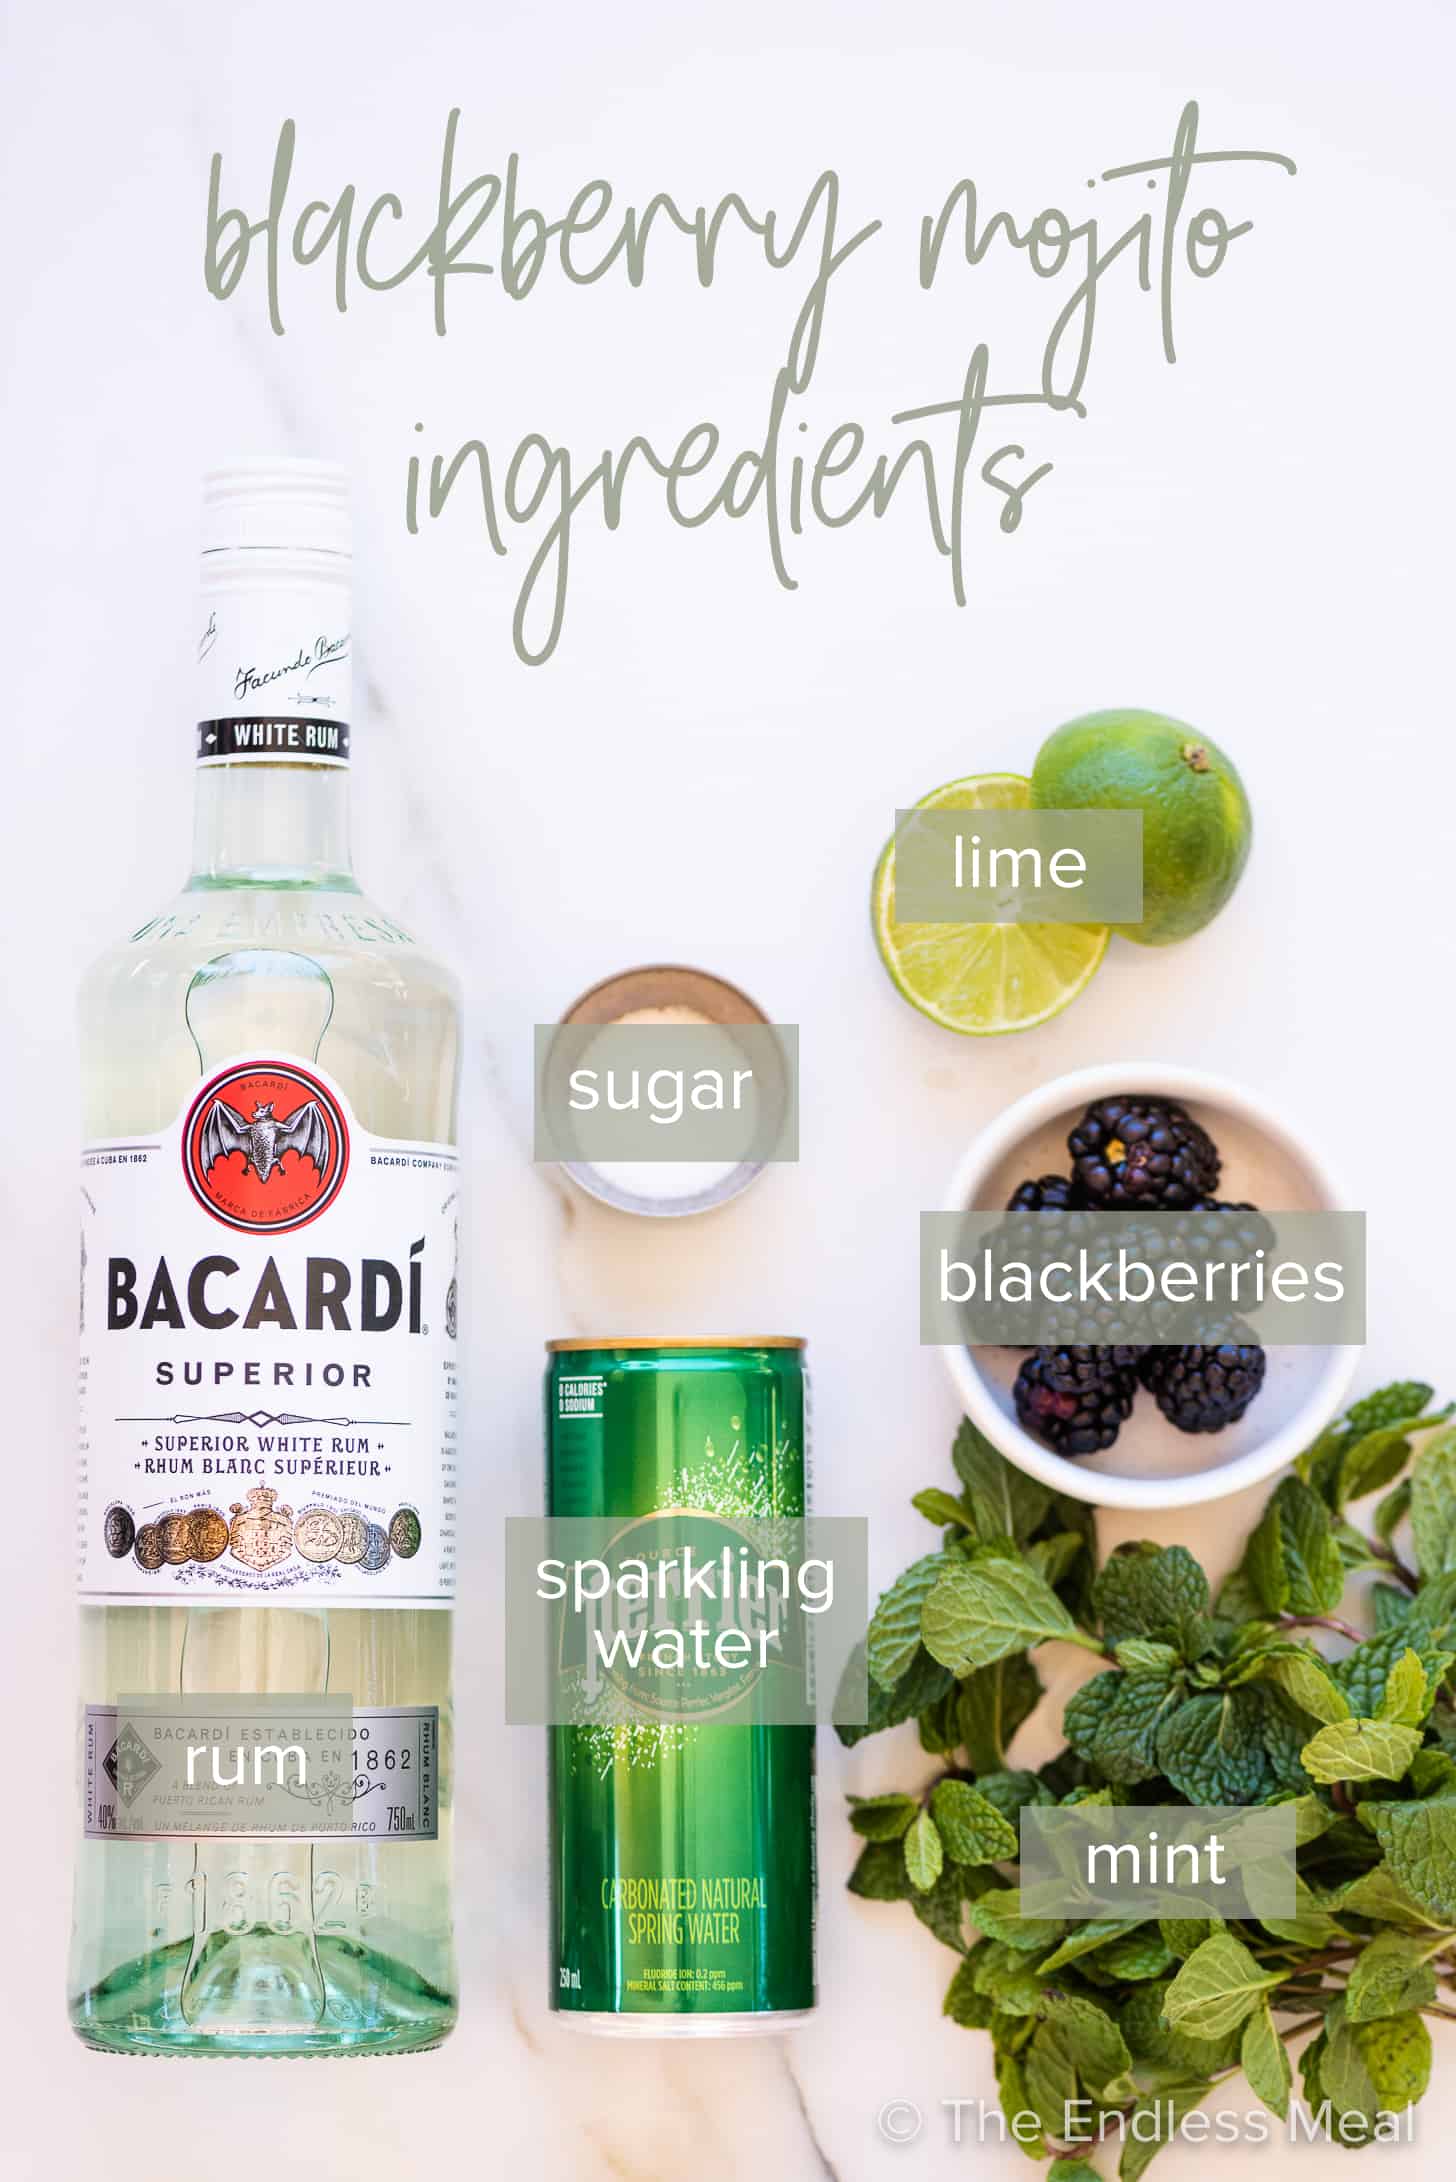 the ingredients needed to make a Blackberry Mojito